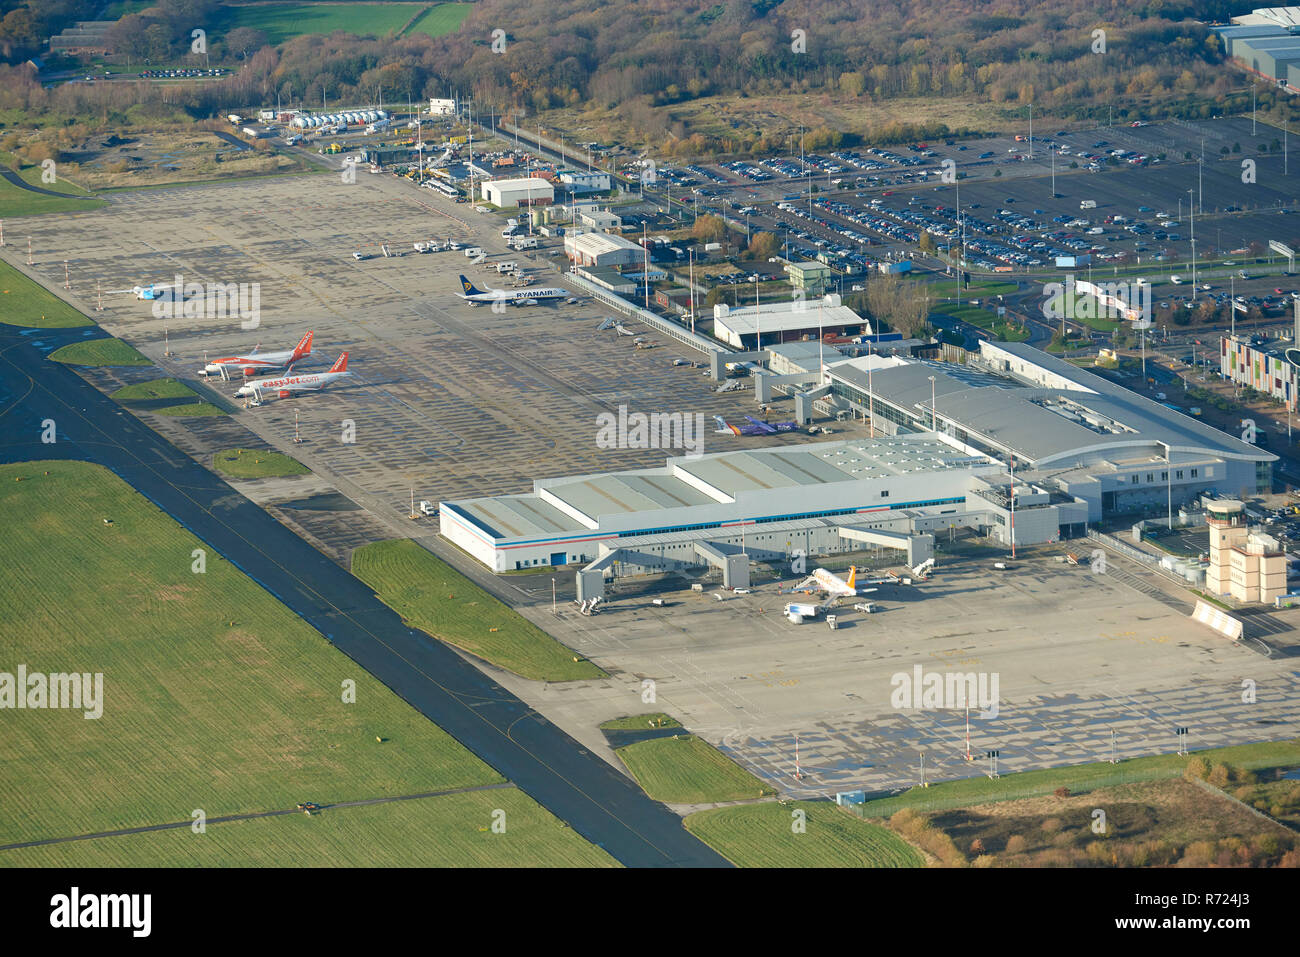 An aerial view of Liverpool John Lennon Airport, North West England, UK Stock Photo